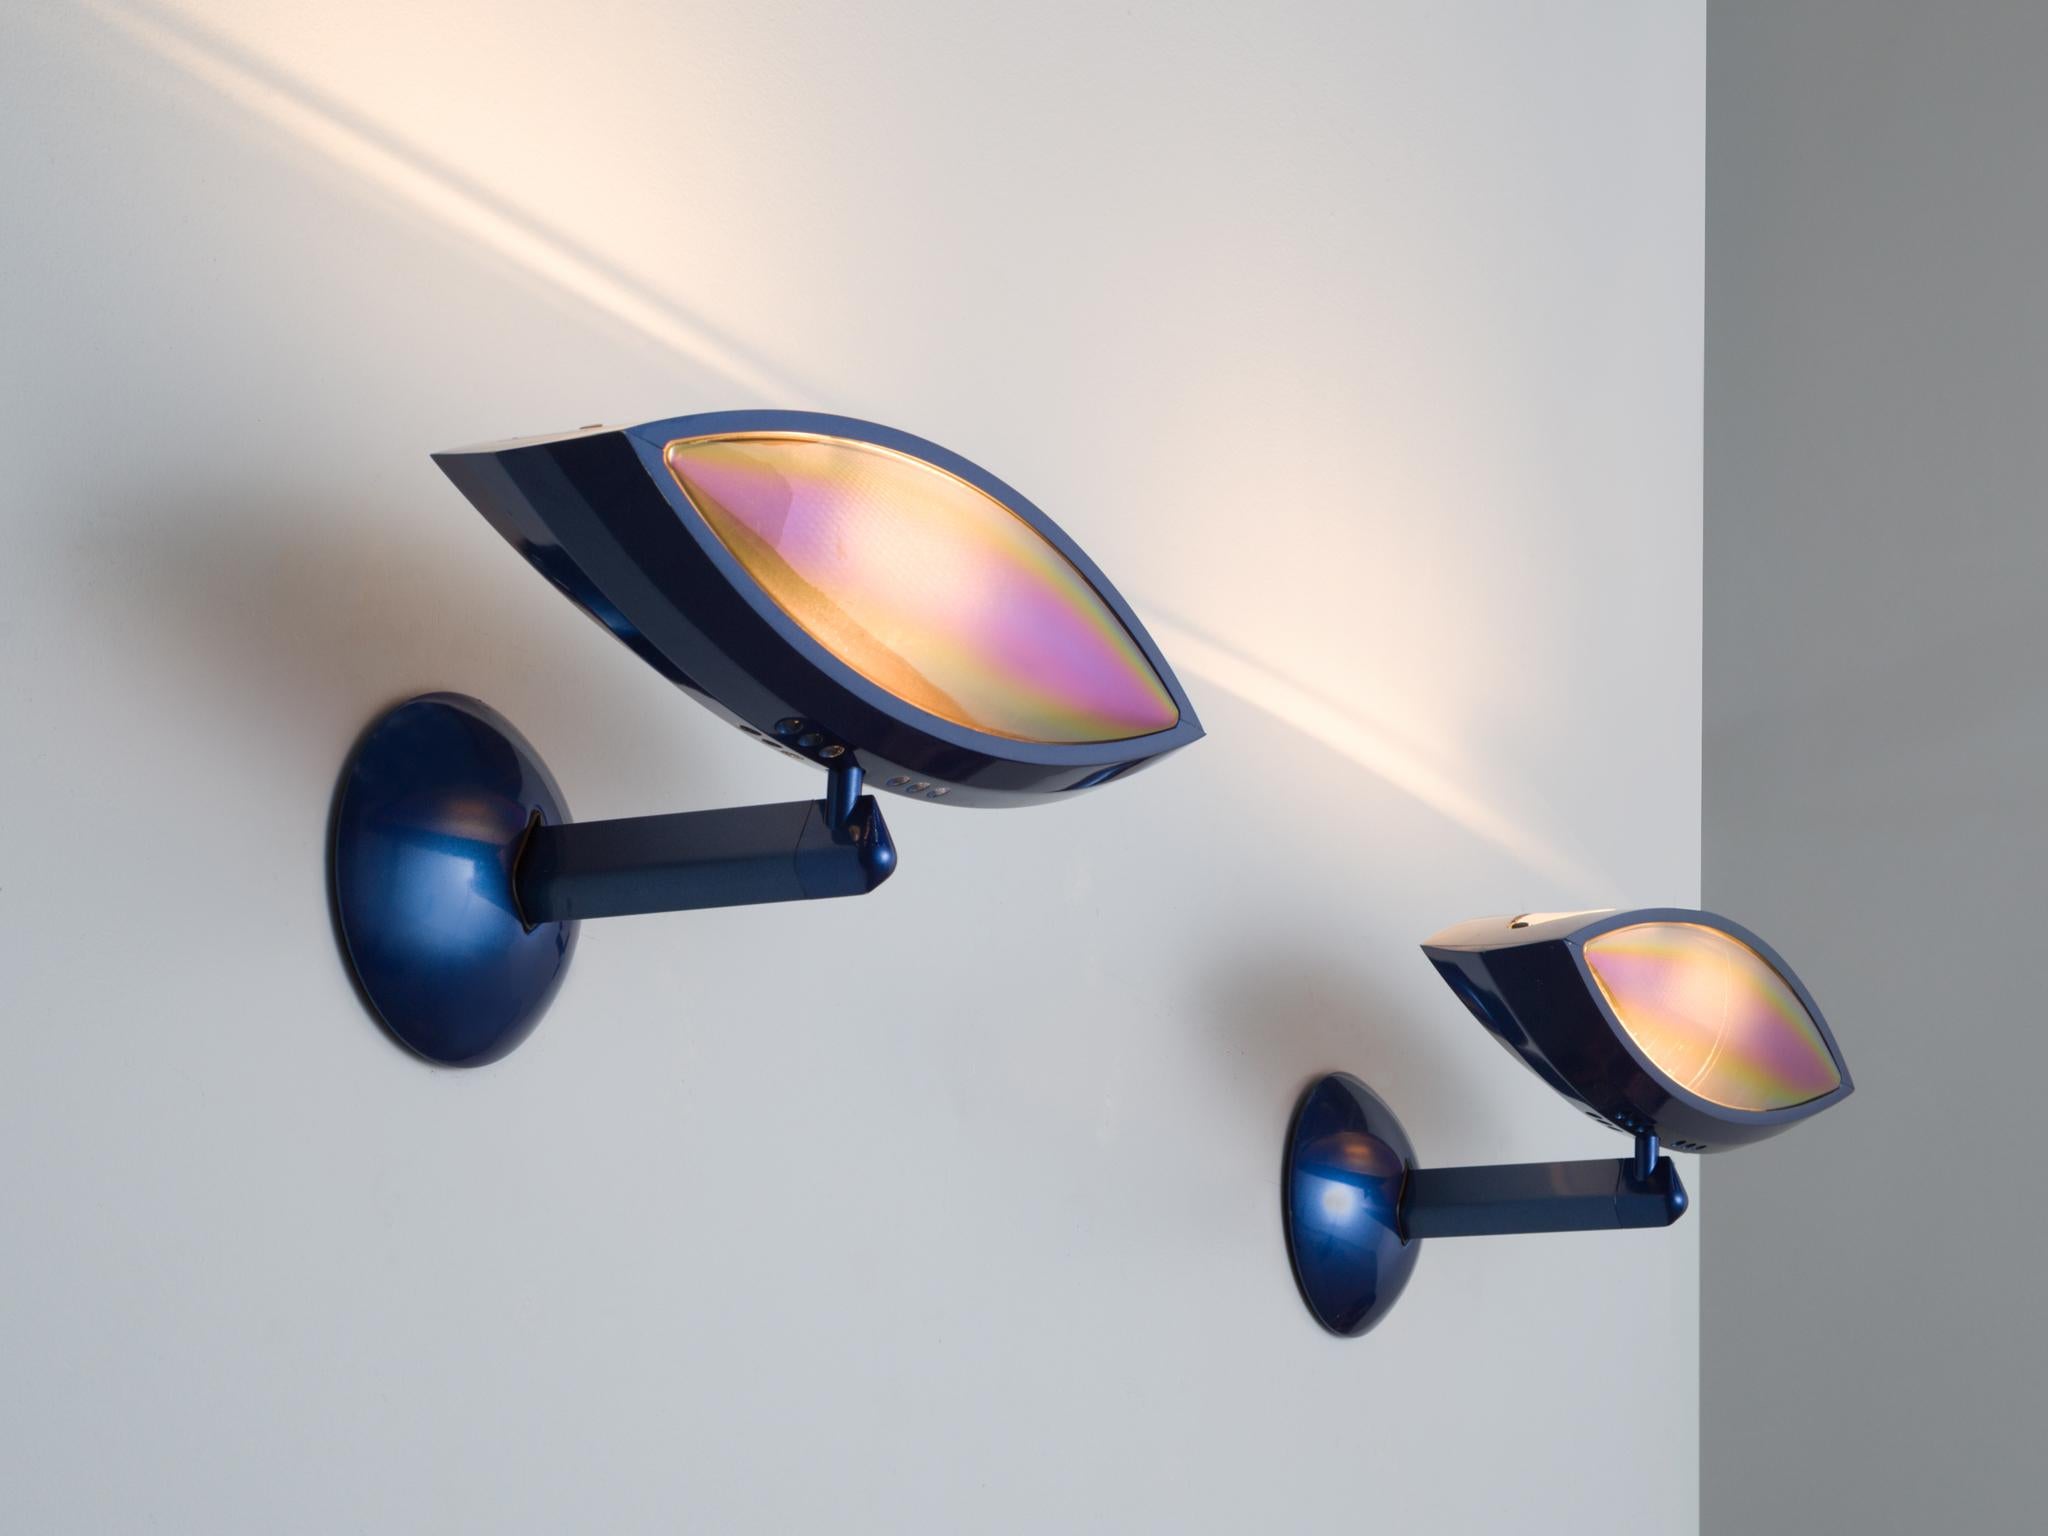 Franco Lombardo for Flos, 'Aeto' blue wall lights, metal, Italy, 1980s.

Well-designed pair of wall lights that features an adjustable eye-form light and has a round black metal base and a blue stem. This lamp is archetypical for post-war Italian